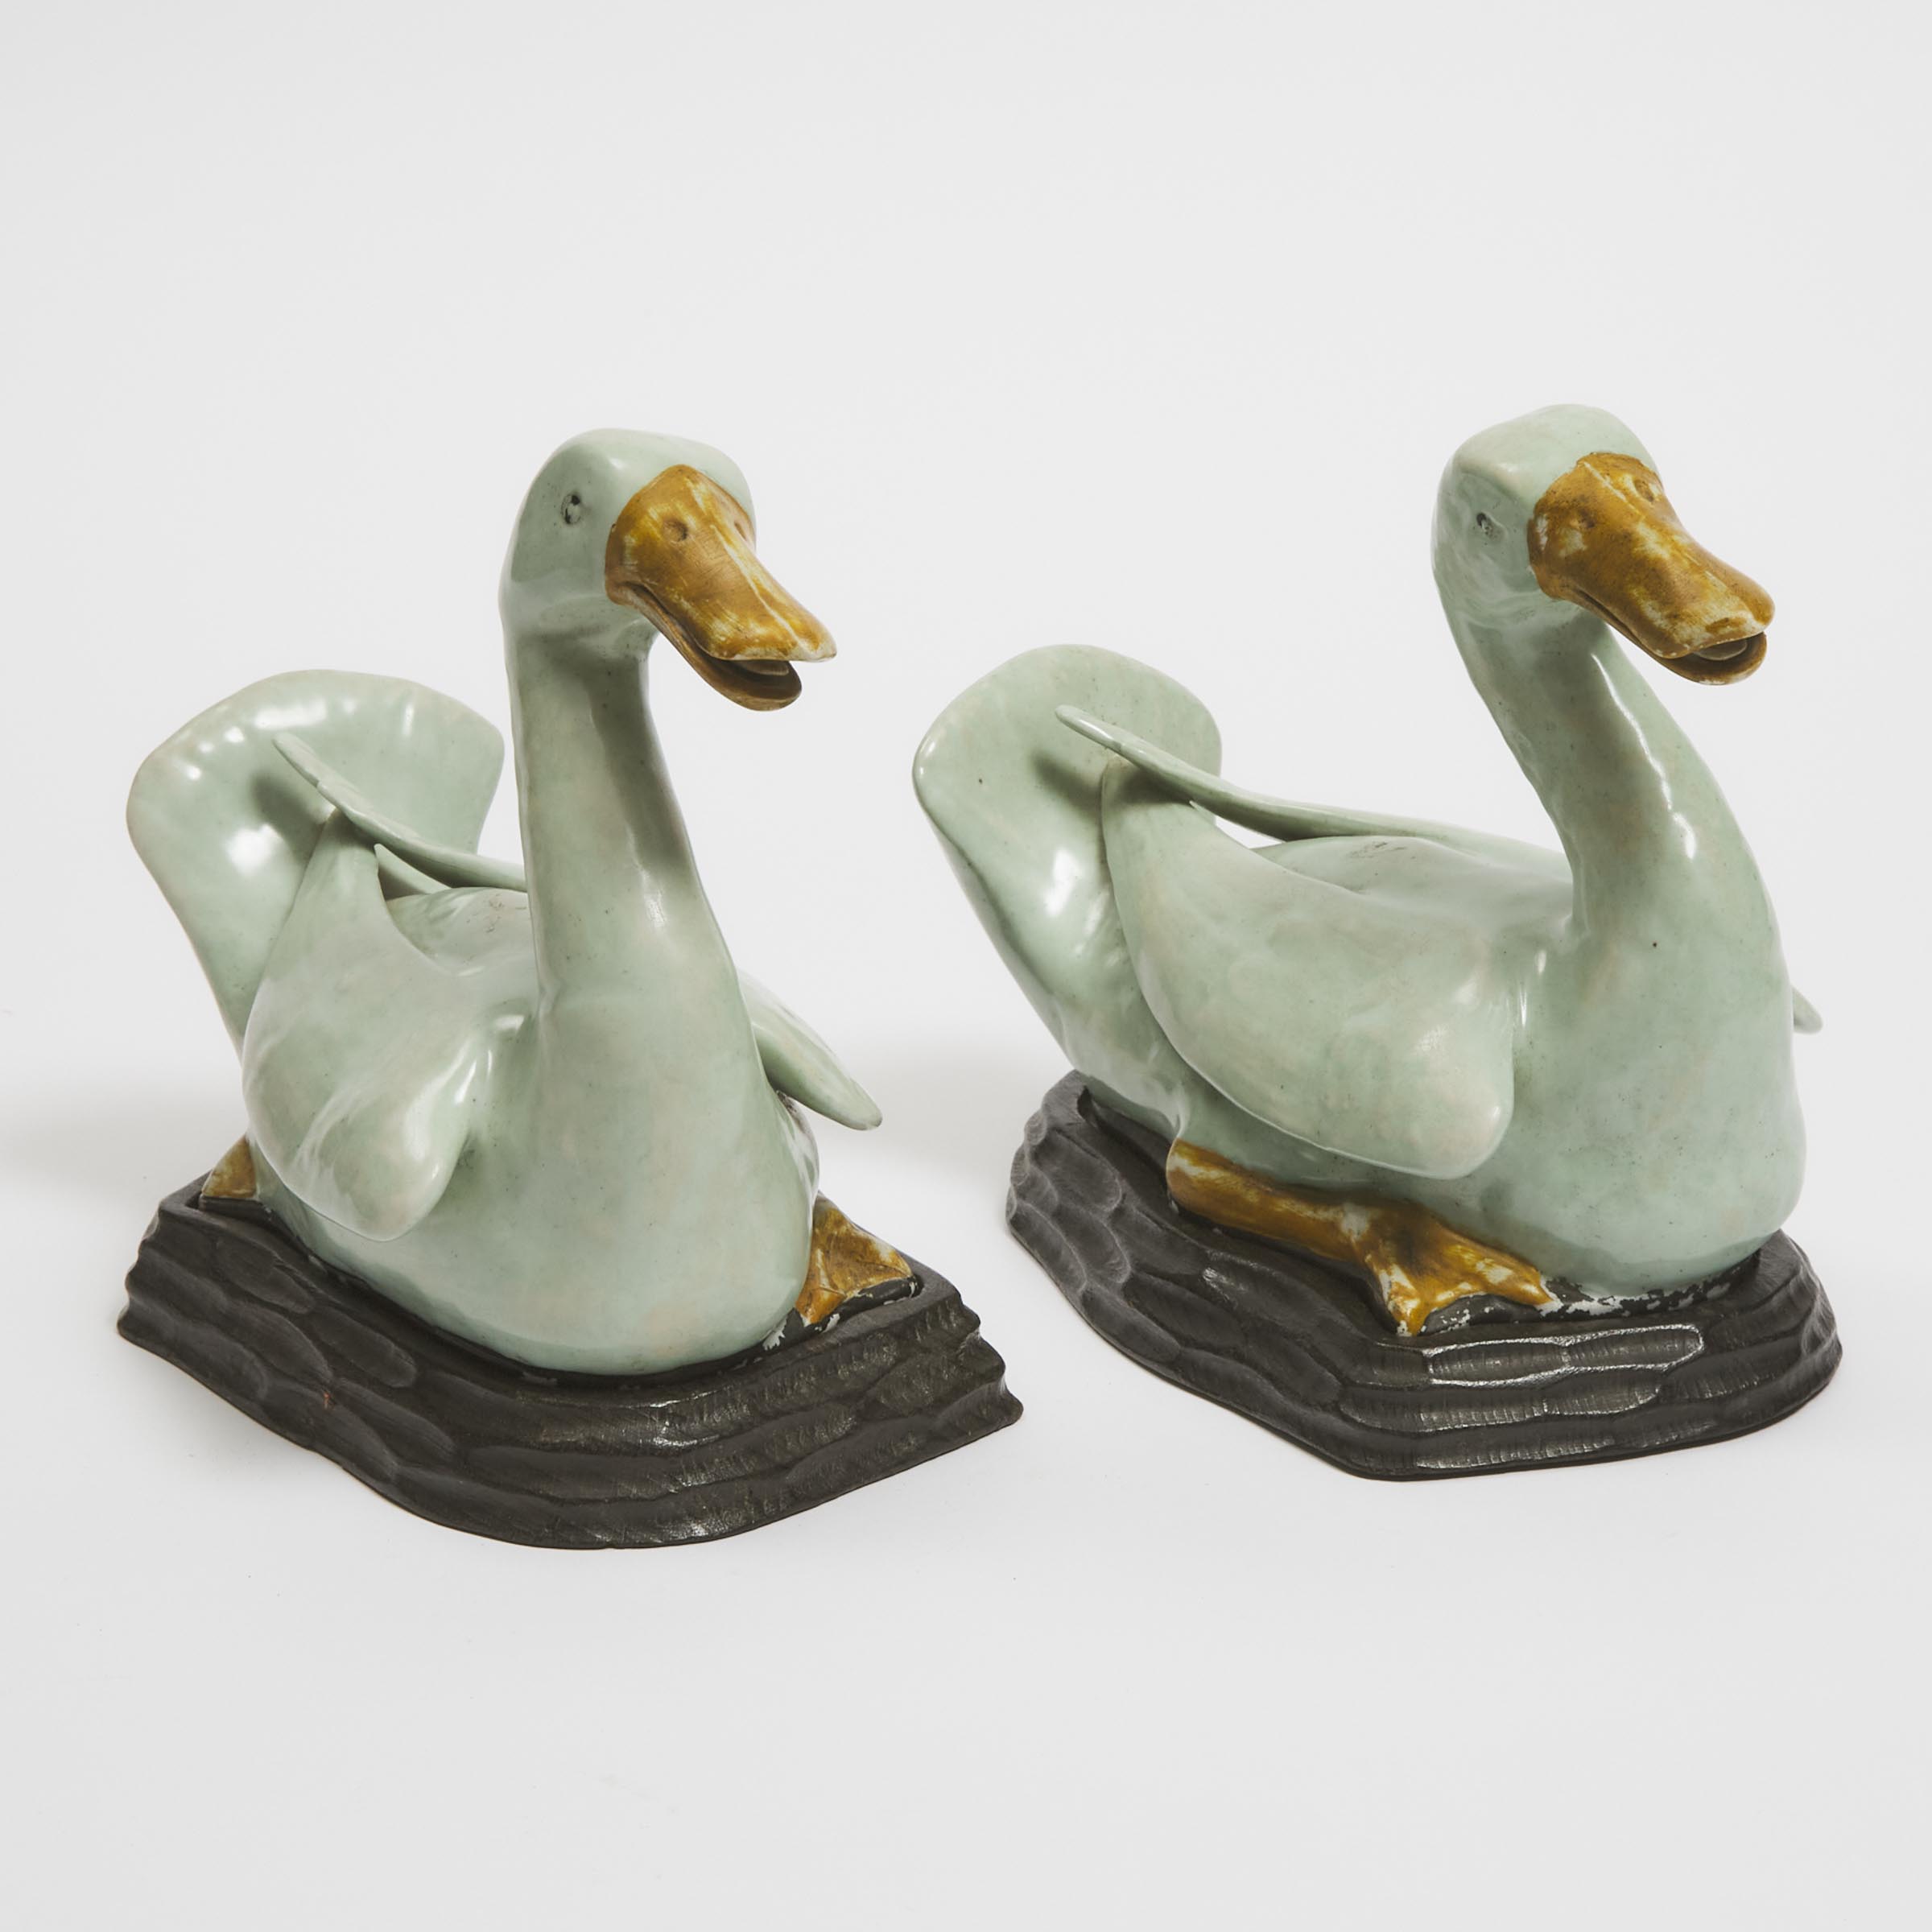 A Pair of Chinese Export Green-Enameled